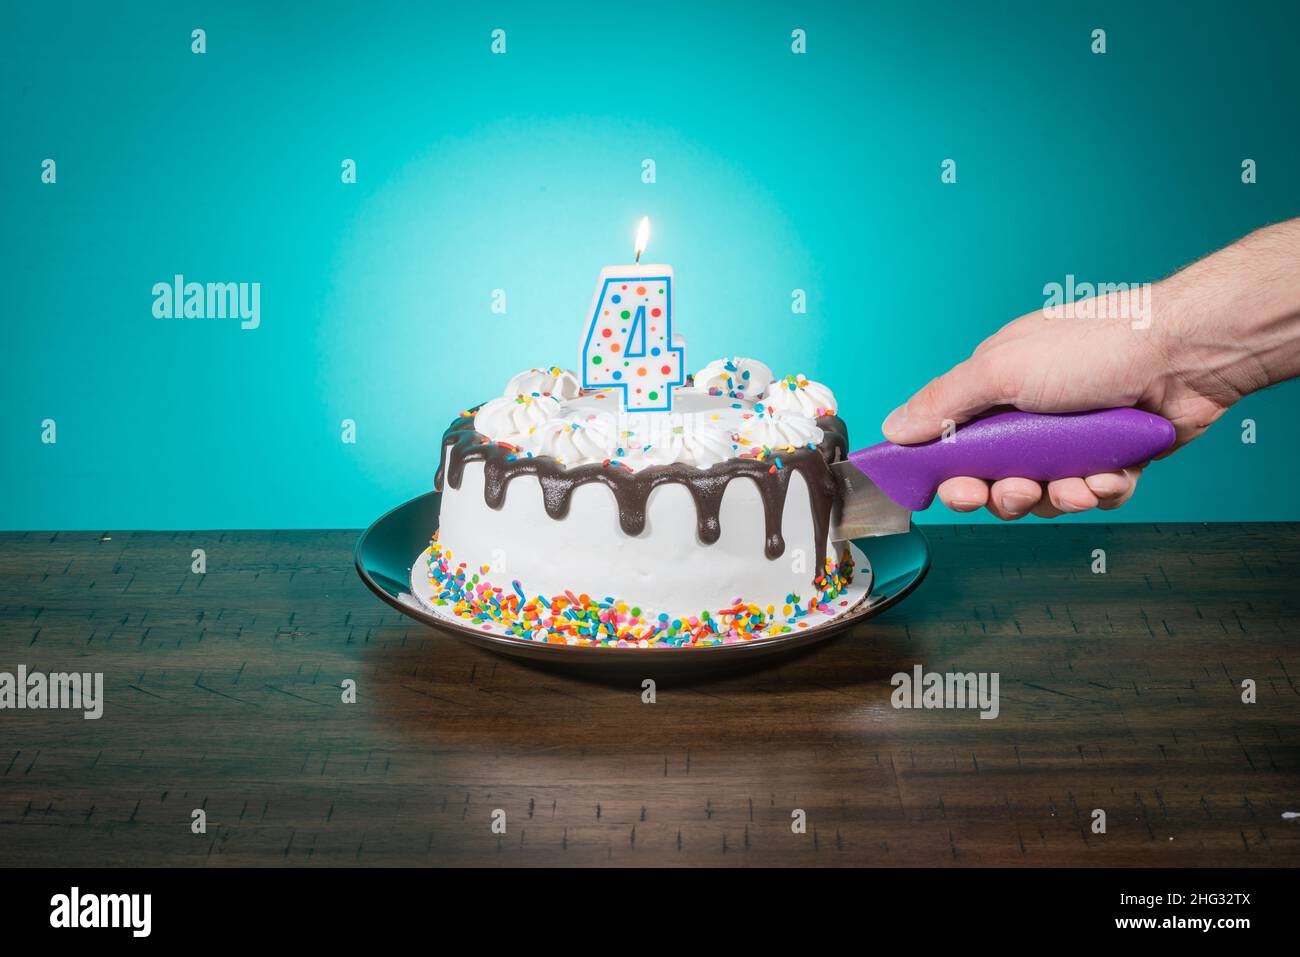 A birthday cake bears a candle in the shape of the number 4 while a hand cuts a slice. Stock Photo